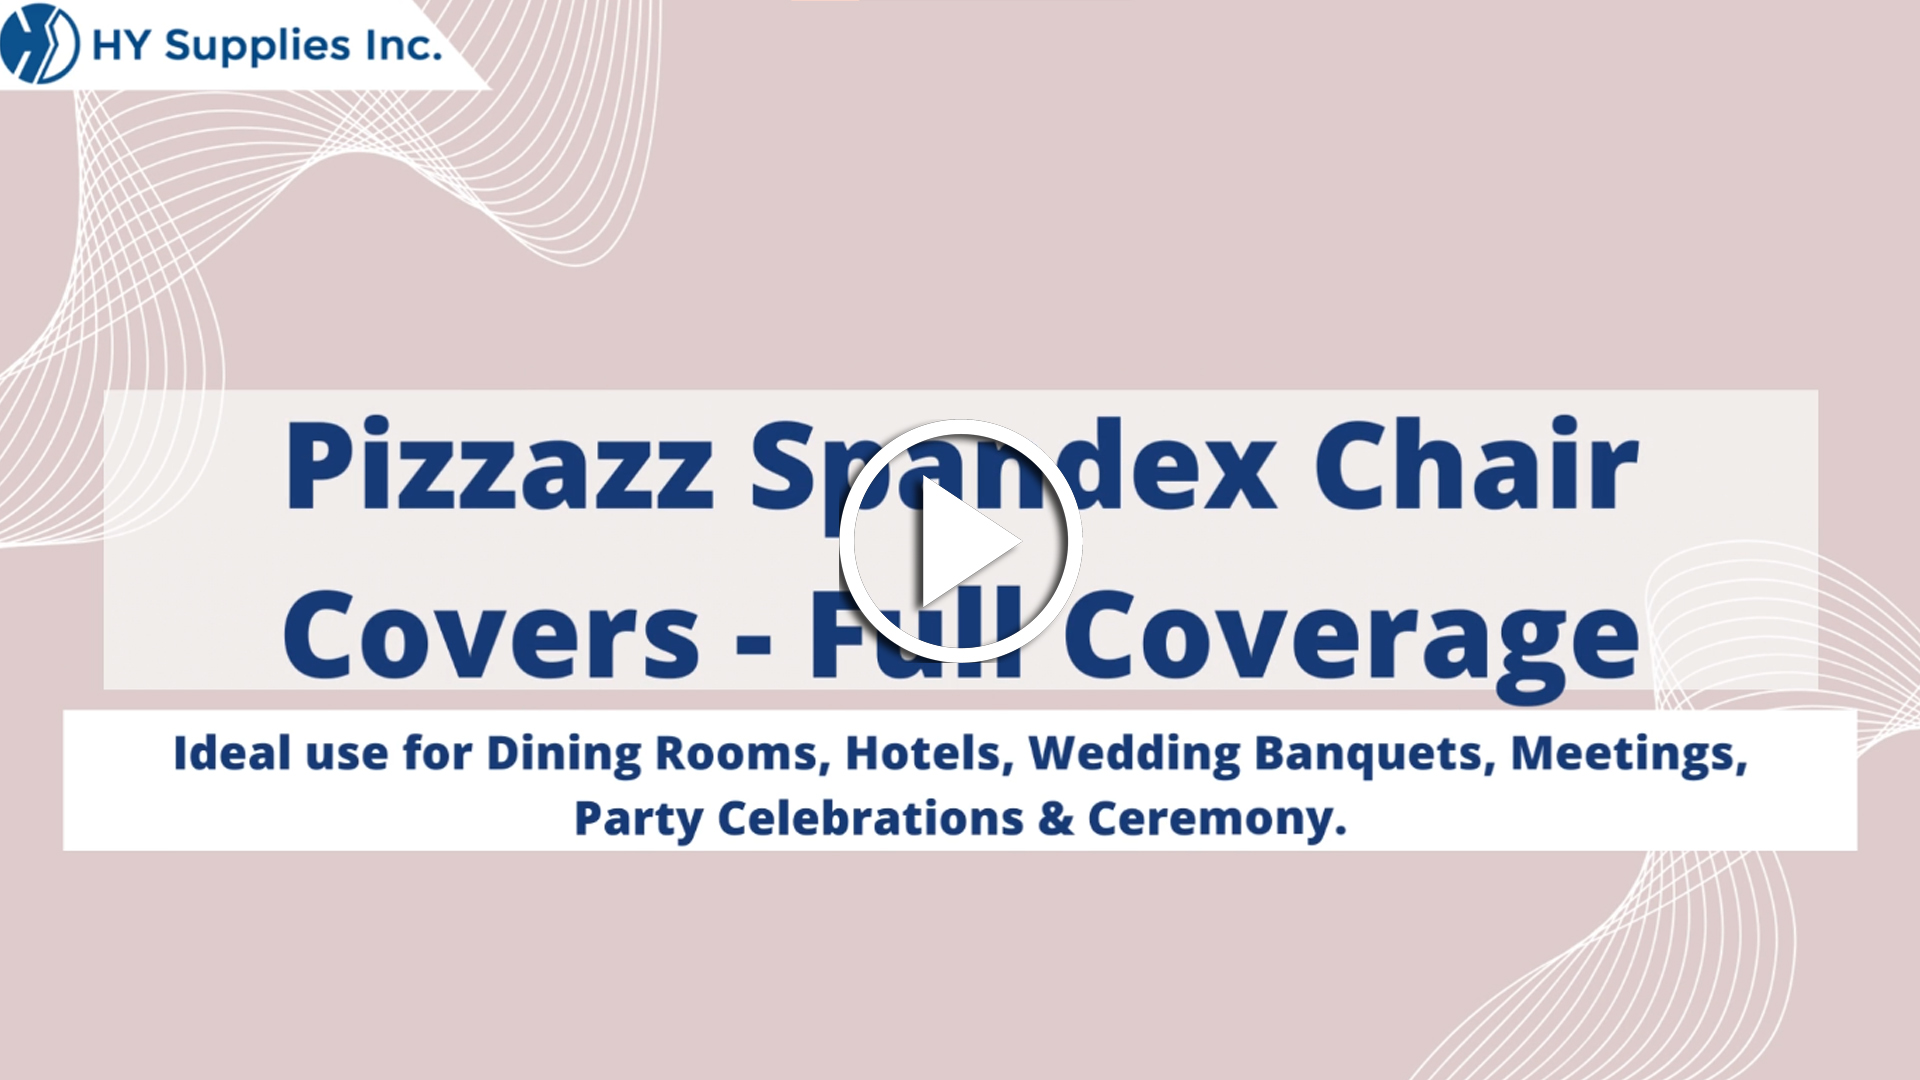 Pizzazz Spandex Chair Covers - Full Coverage